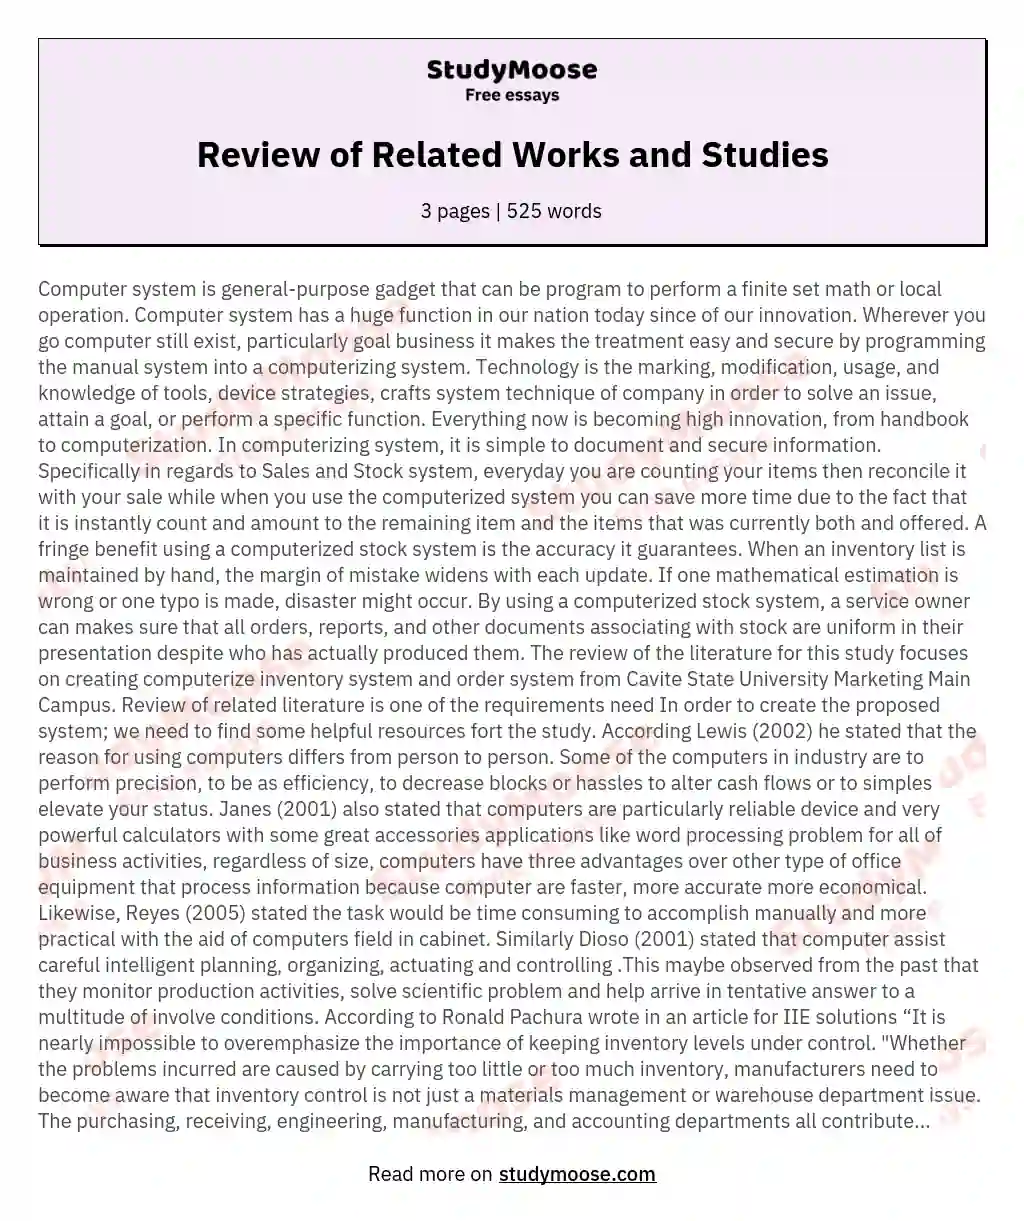 Review of Related Works and Studies